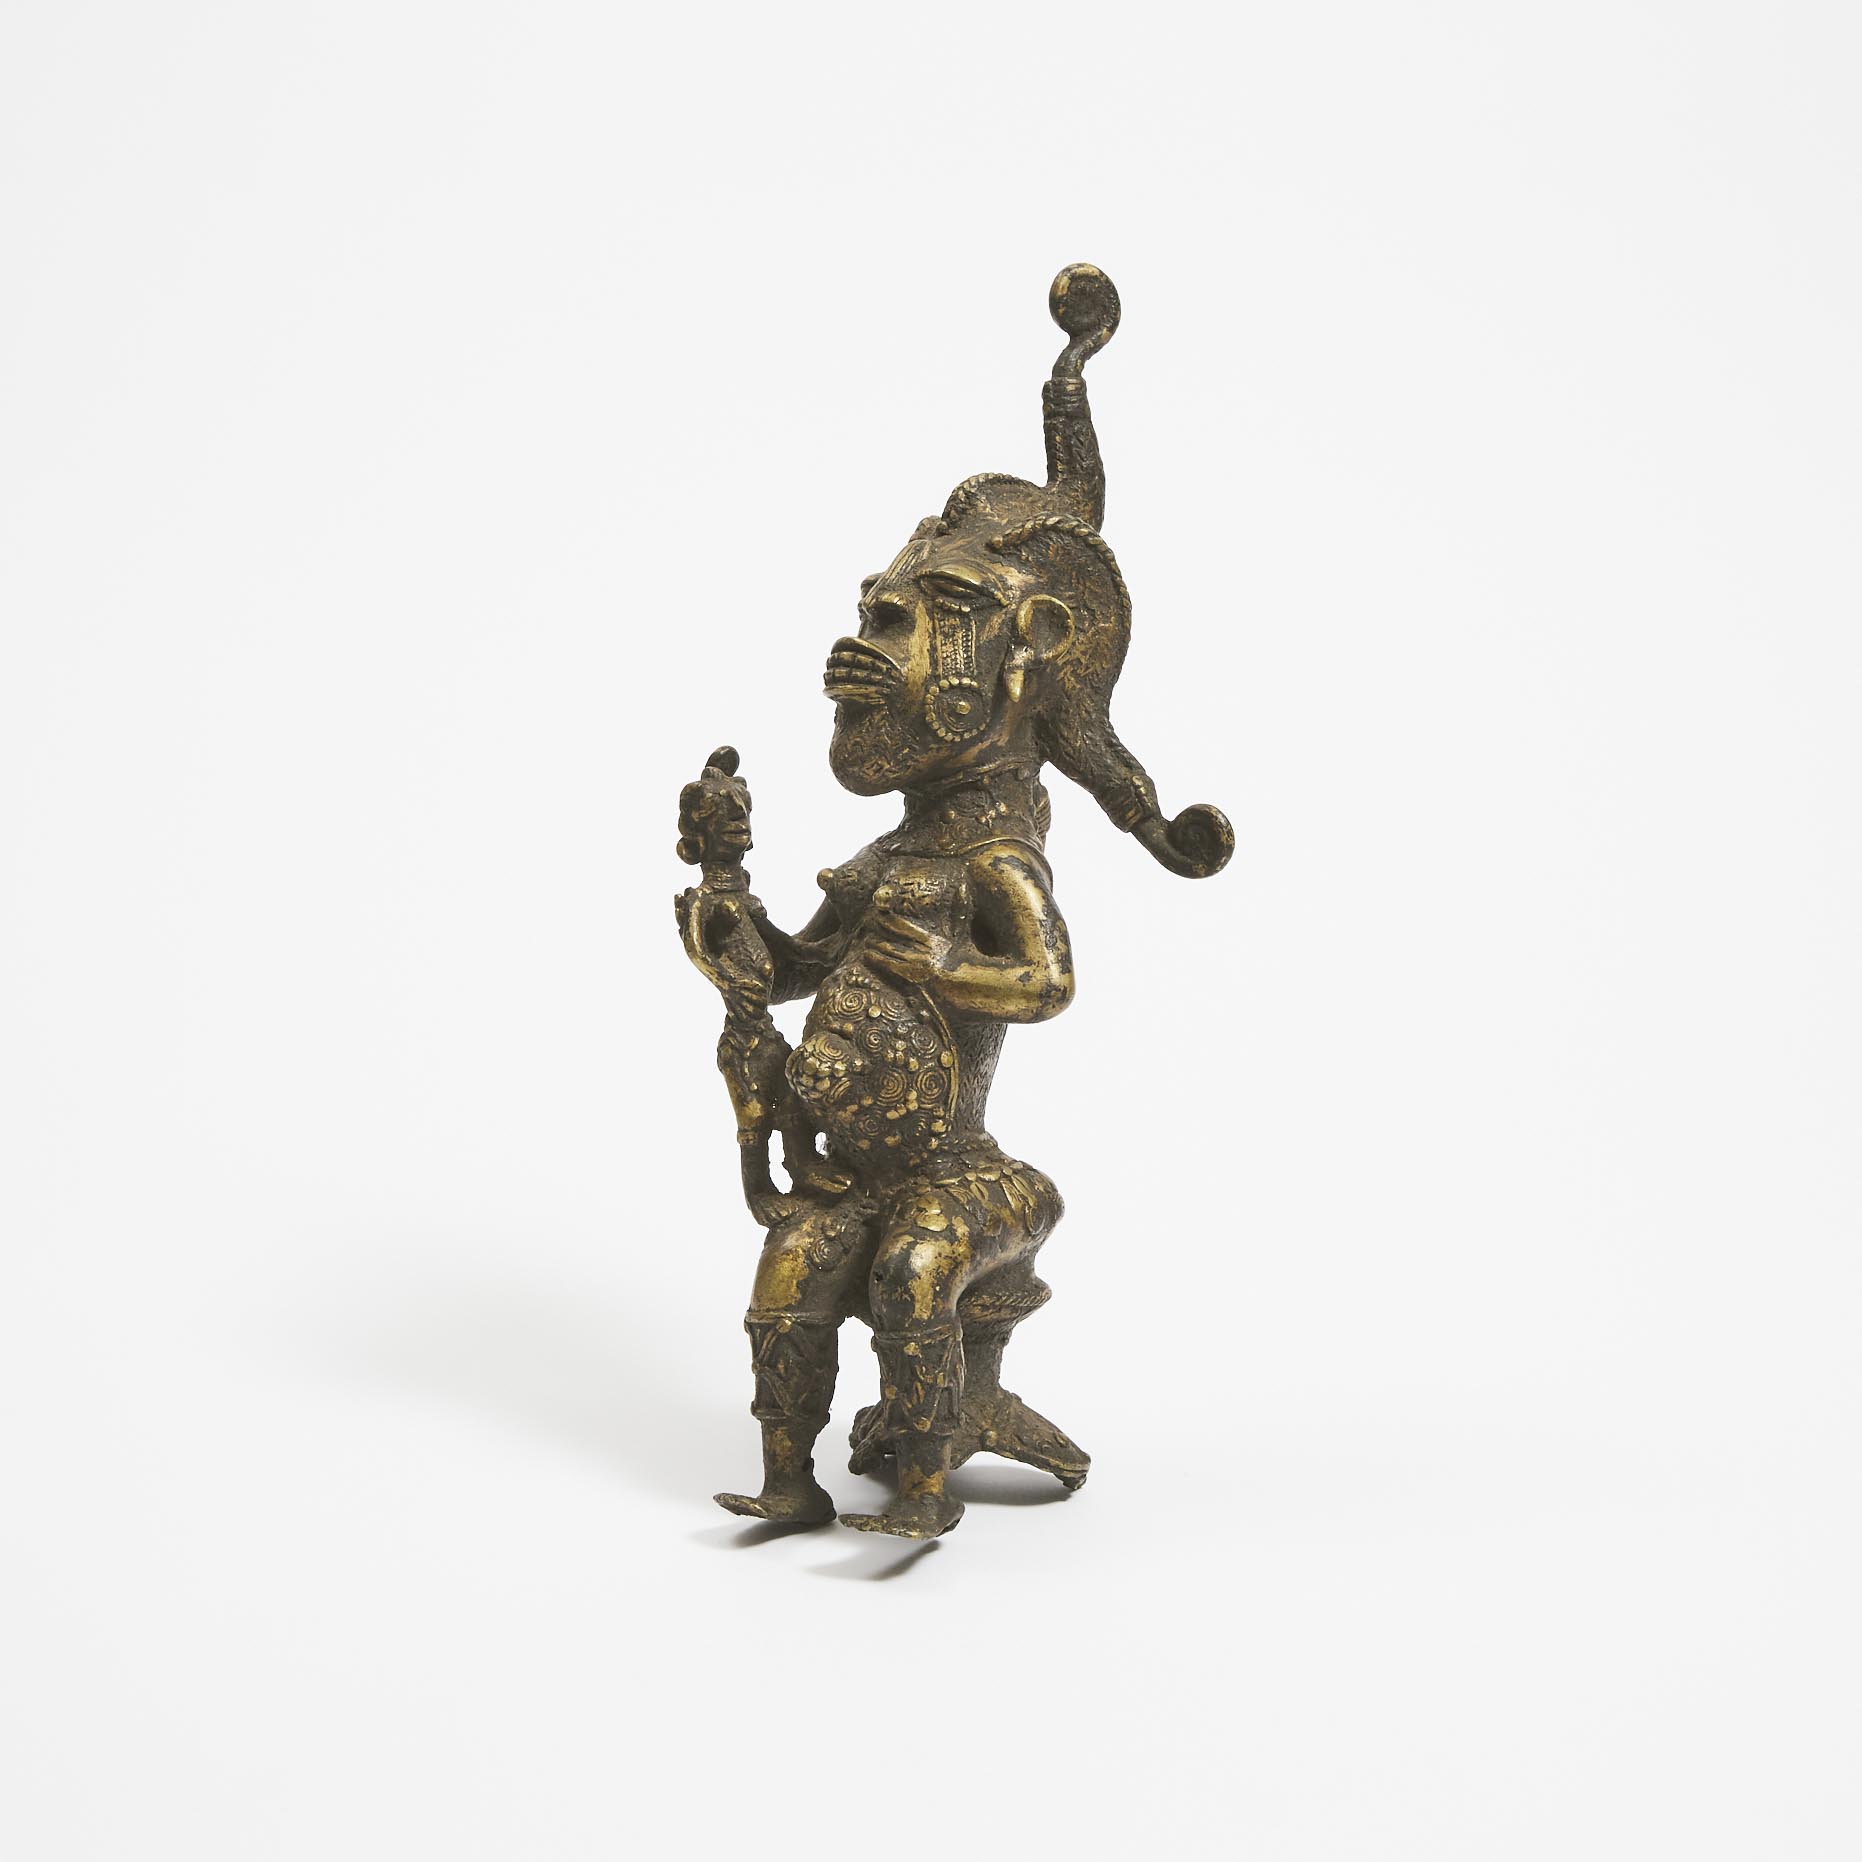 West African Lost Wax Cast Bronze Maternity Figure, Possibly Yoruba, 20th century